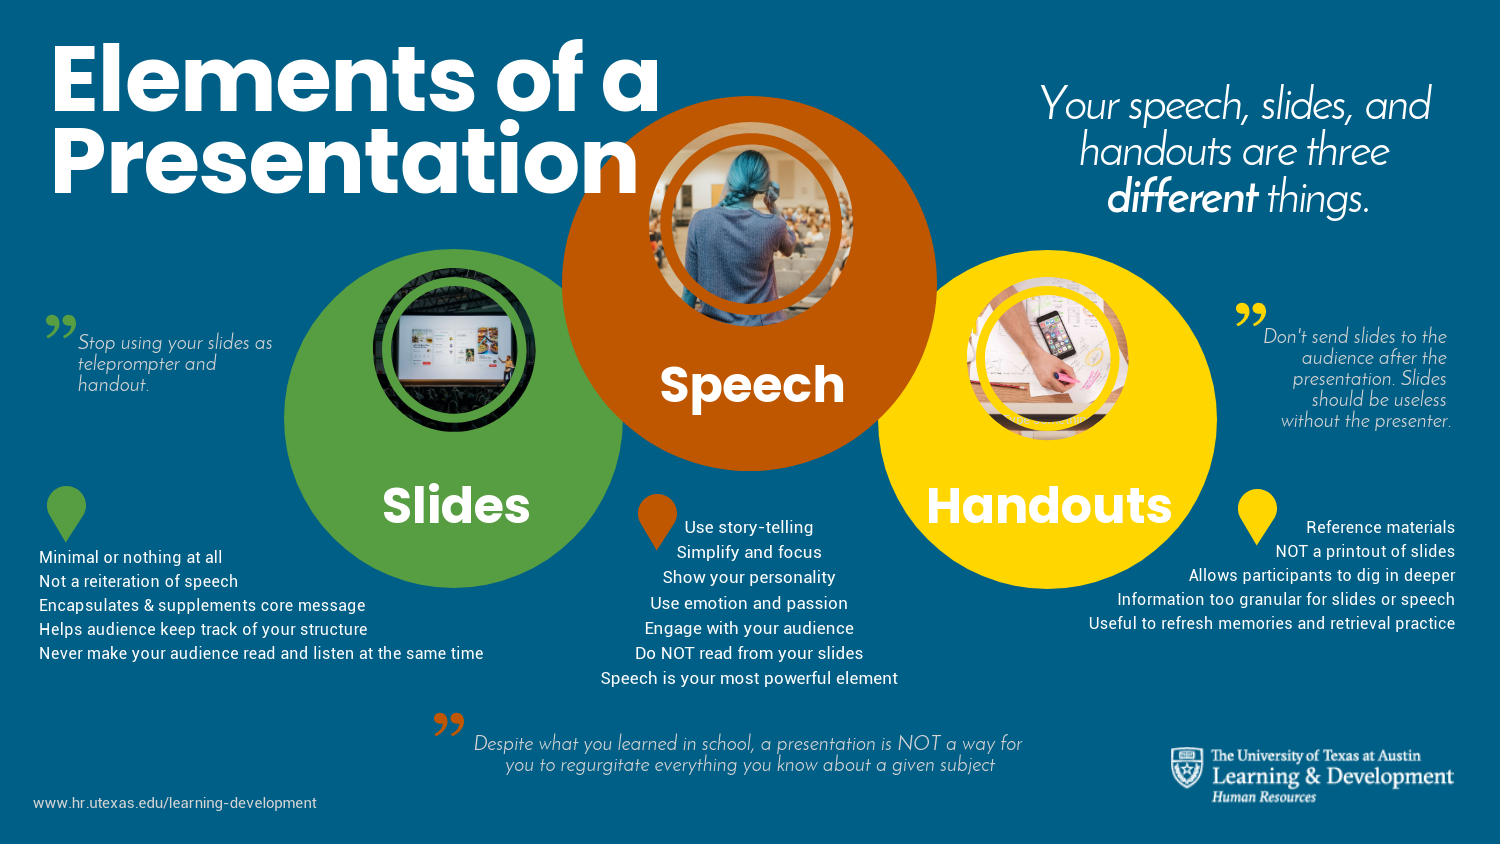 elements of a presentation graphic - your speech, slides, and handouts are three different things.